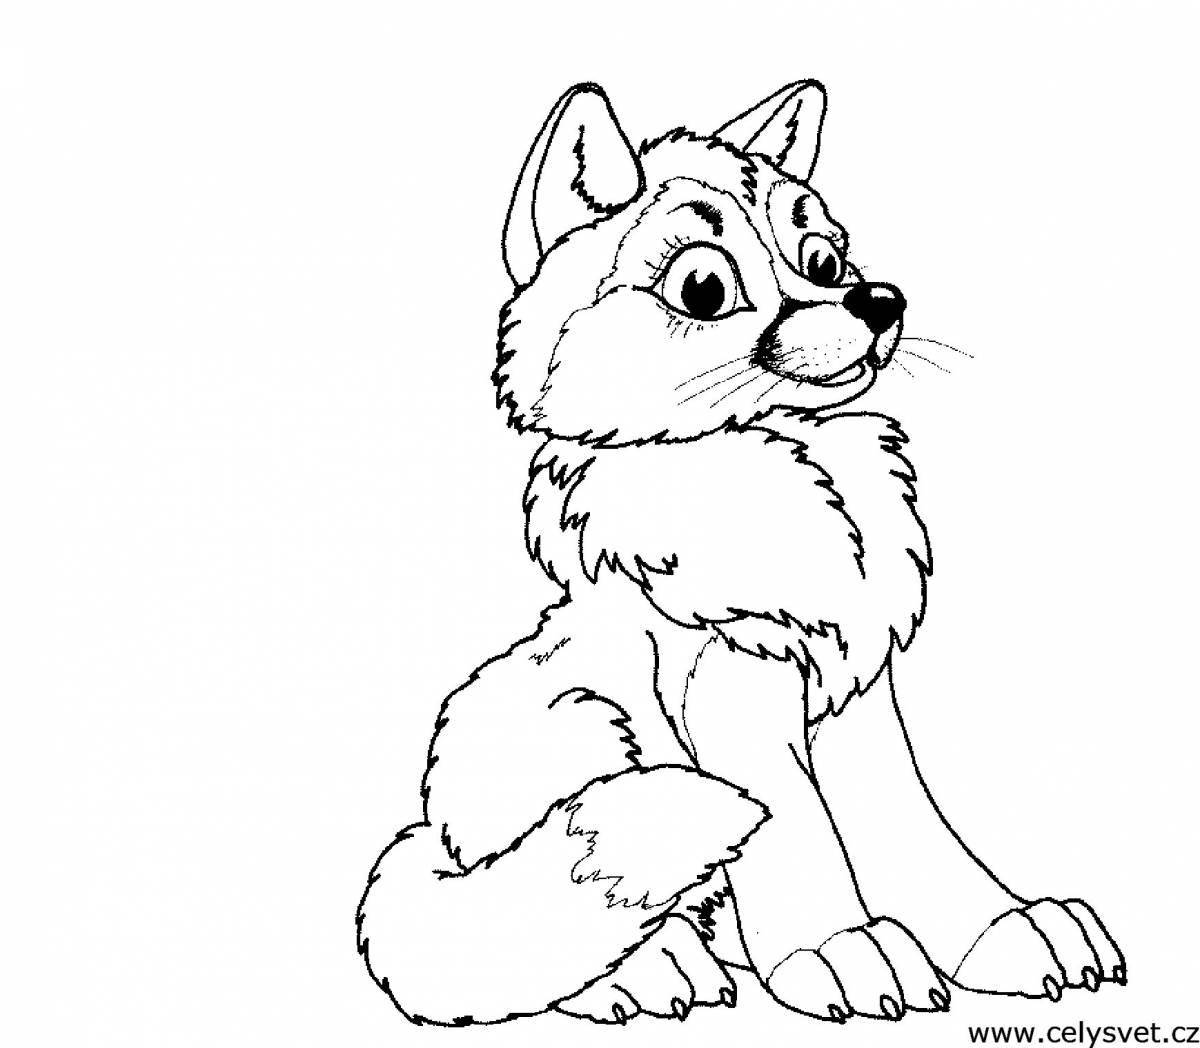 Frightening wolf coloring book